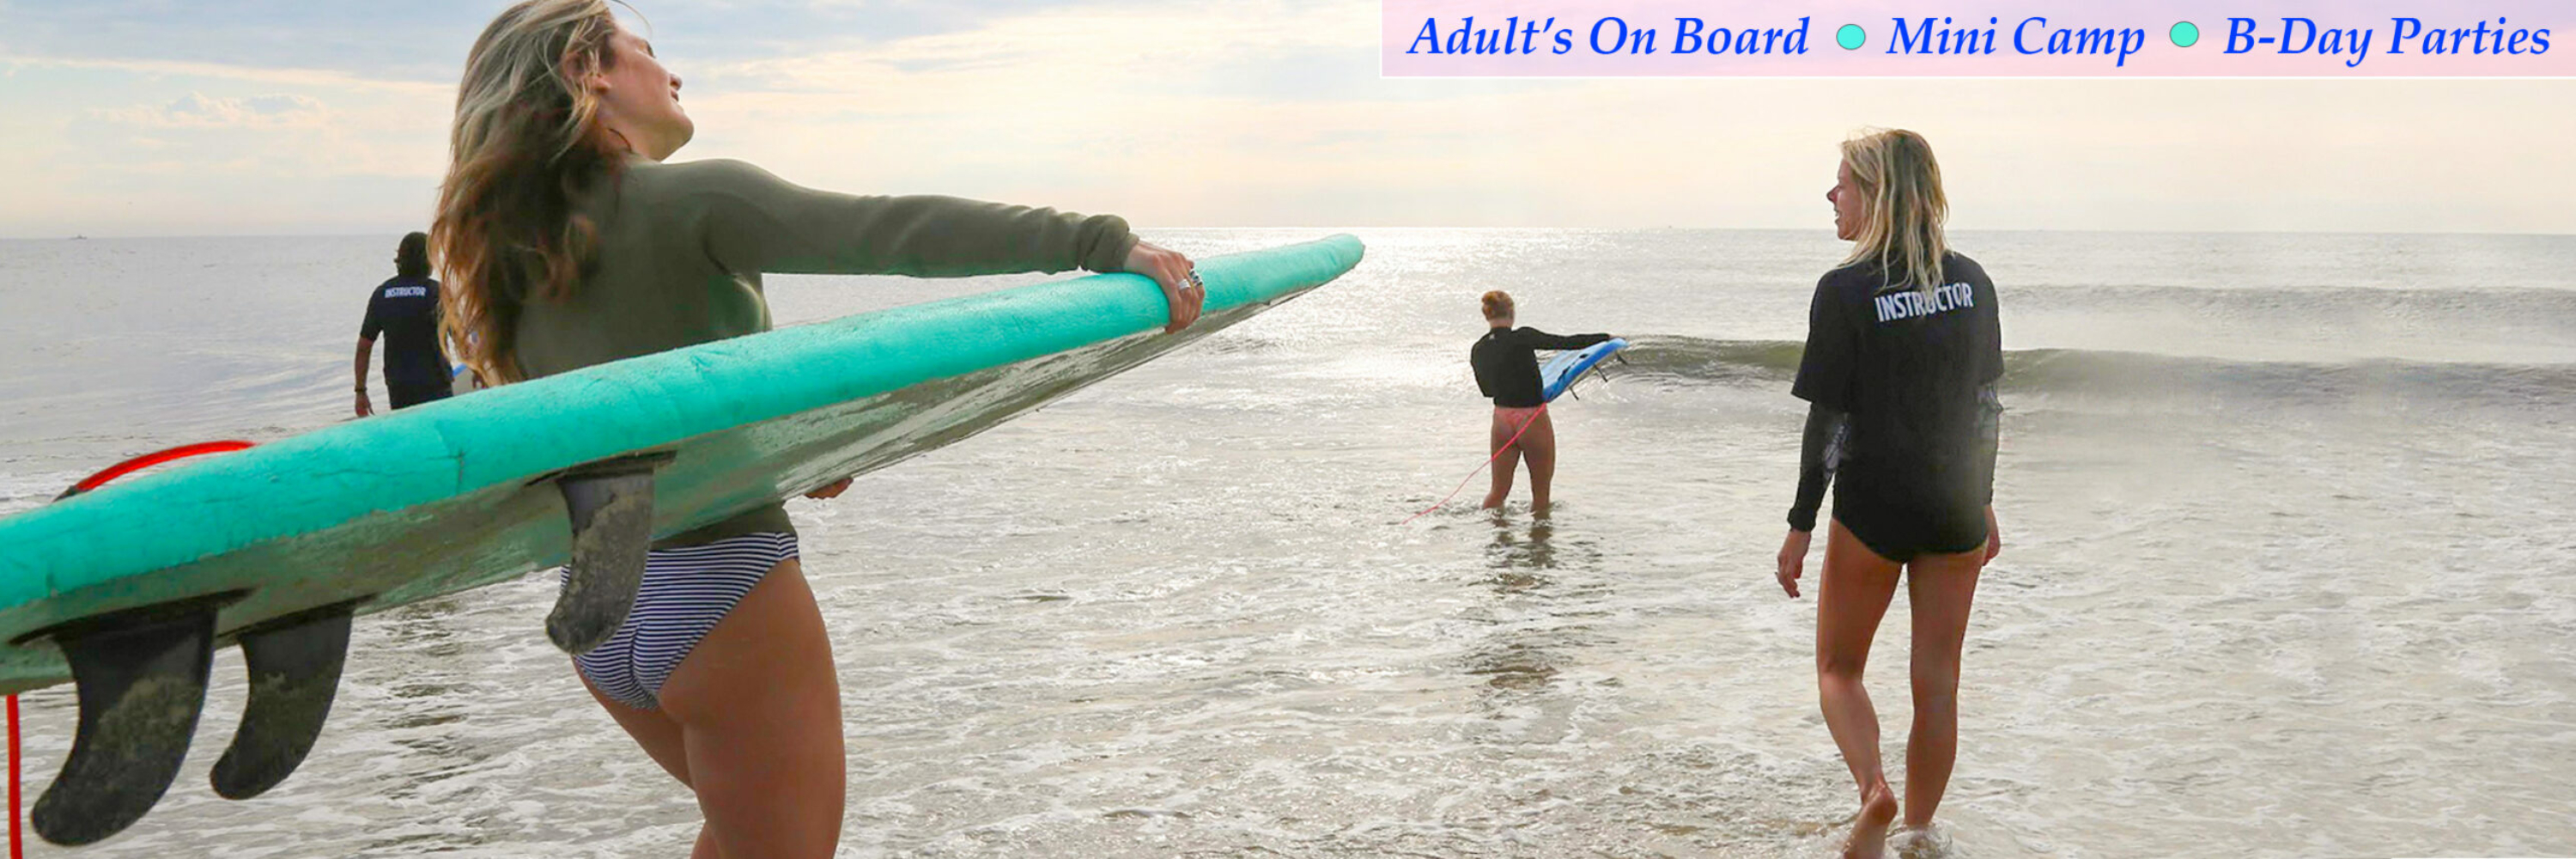 Adult Surf Class, Surfing Birthday Parties, Mini Surf Camp